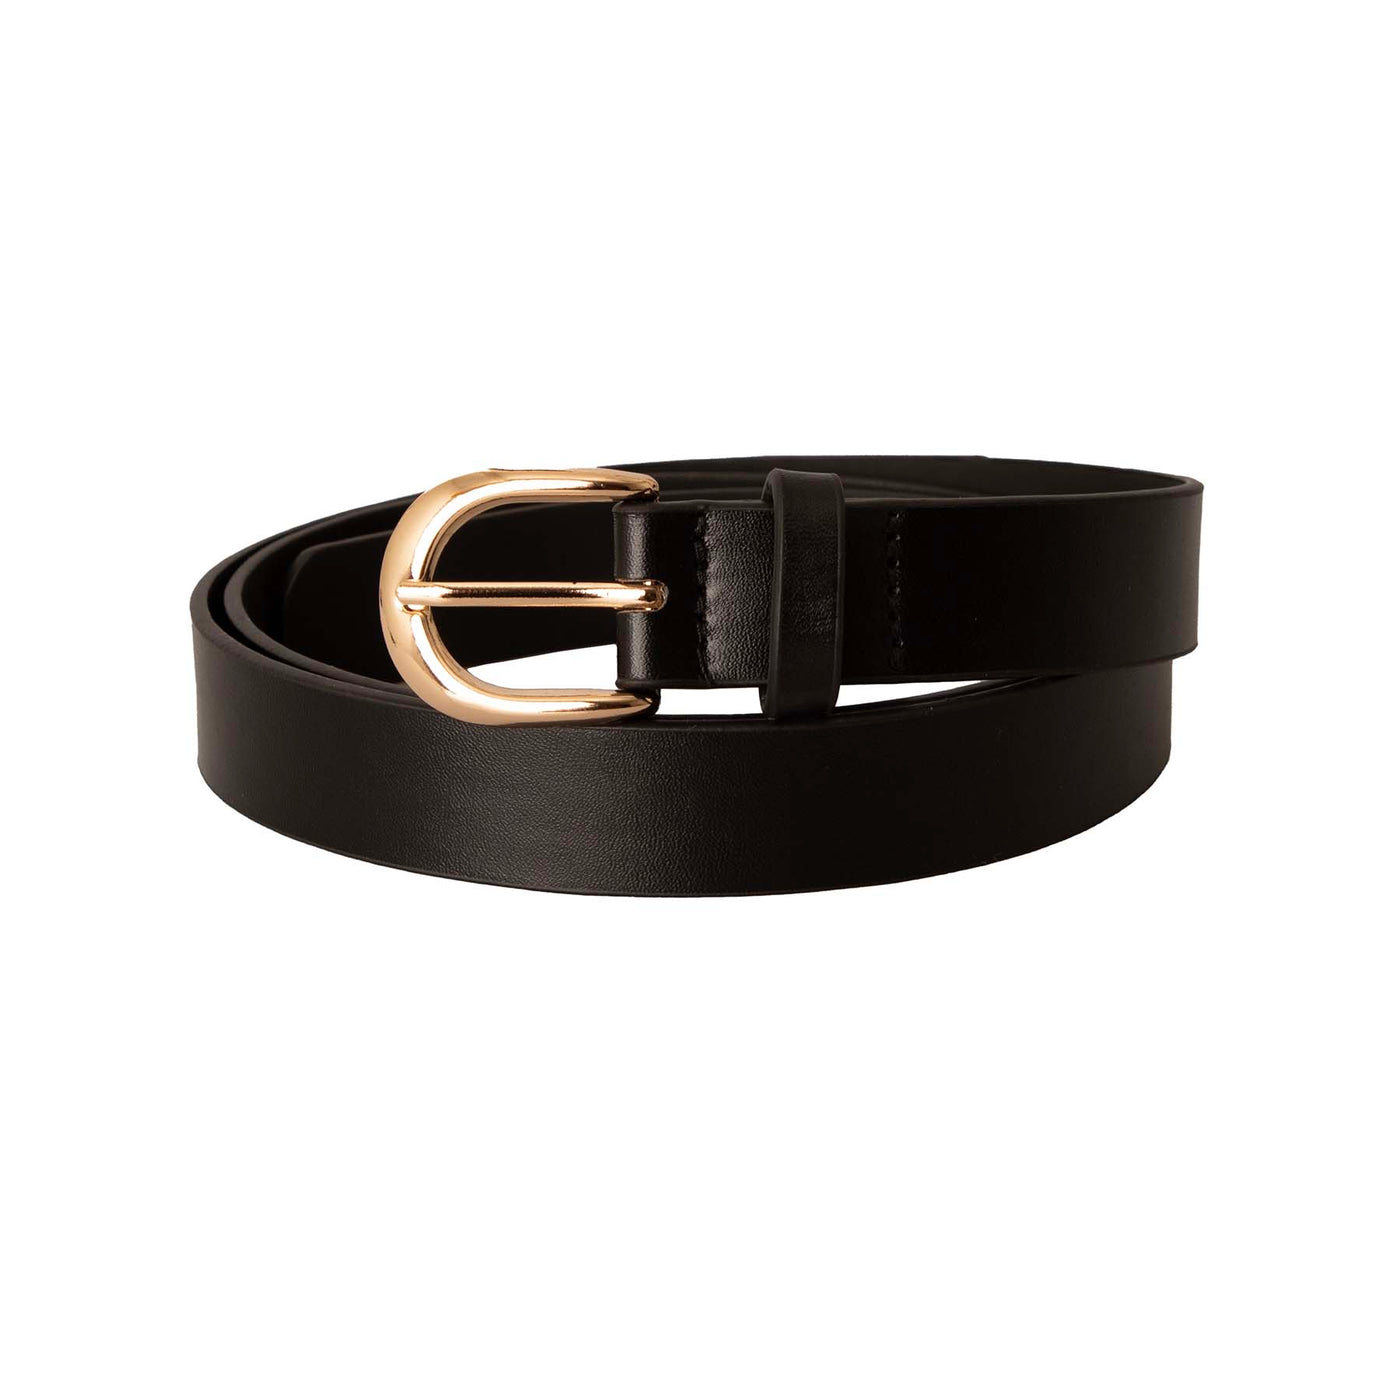 Sass Seema Belt with Gold Buckle in Black